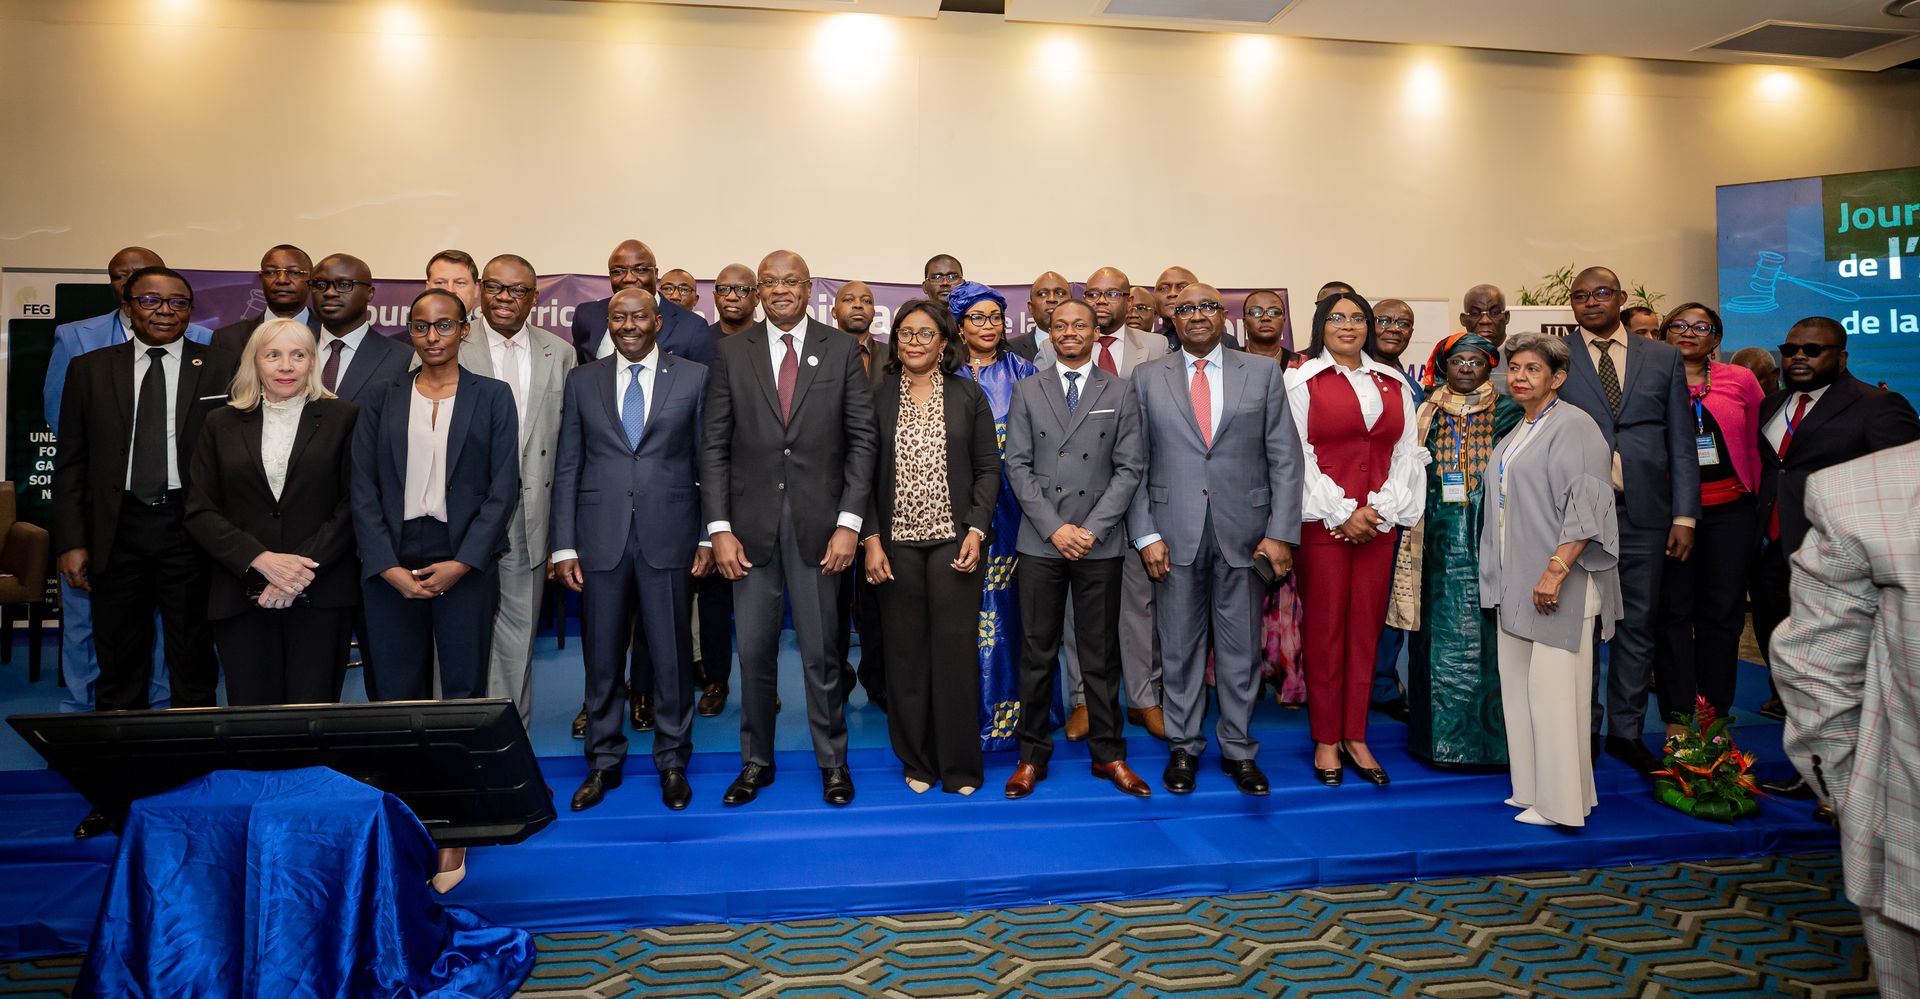 Launch of the 3rd African Arbitration and Mediation Days (JAAM)